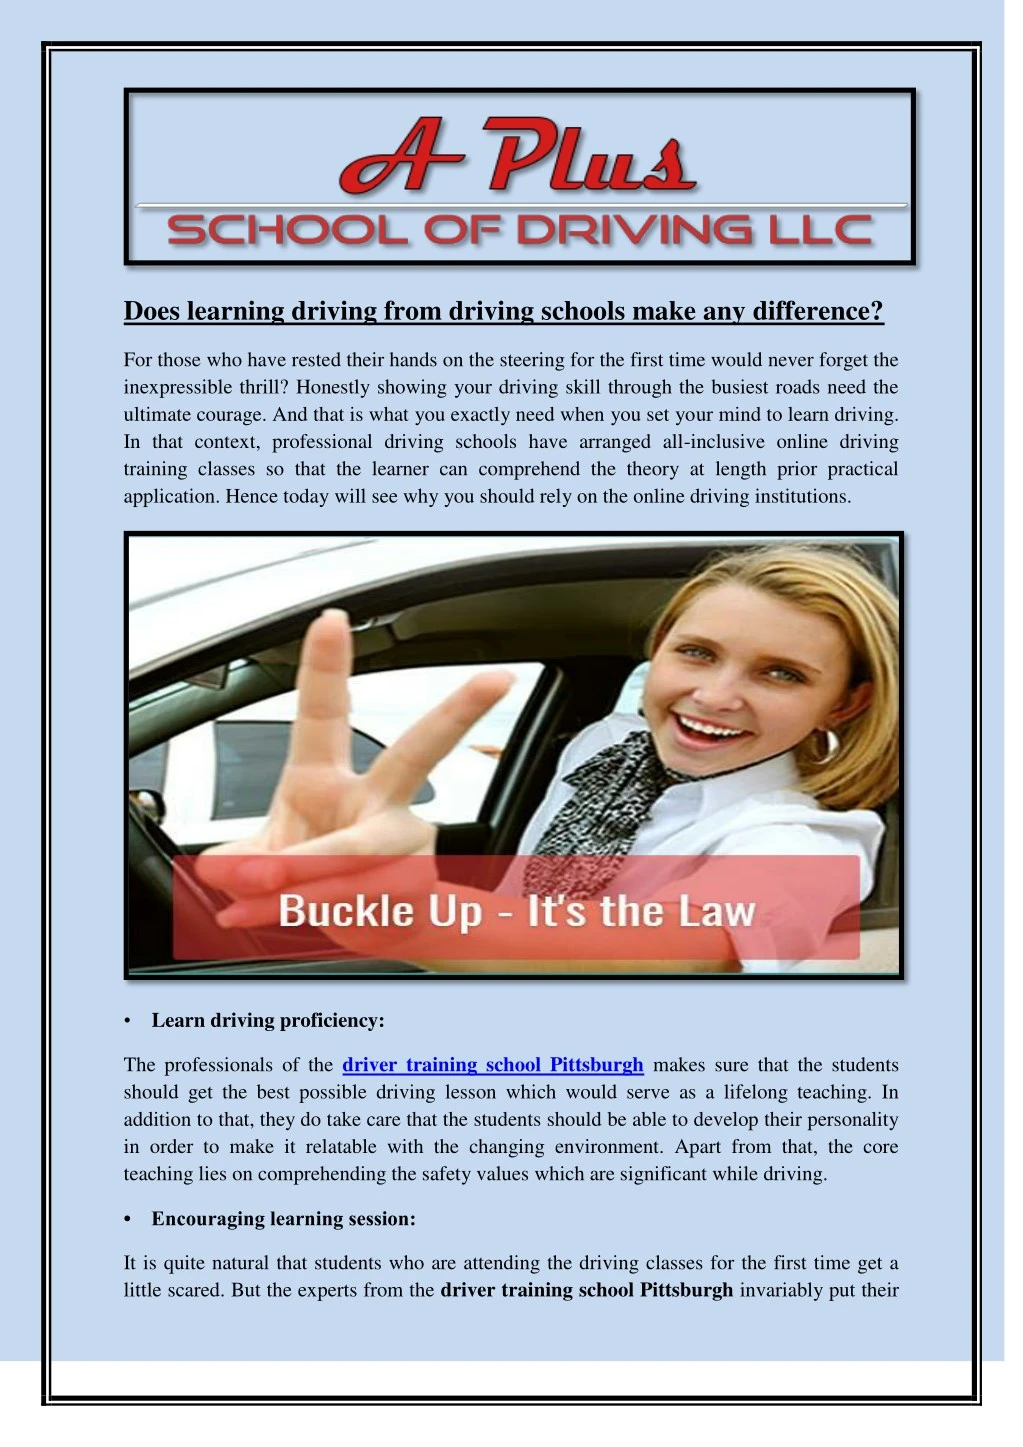 does learning driving from driving schools make